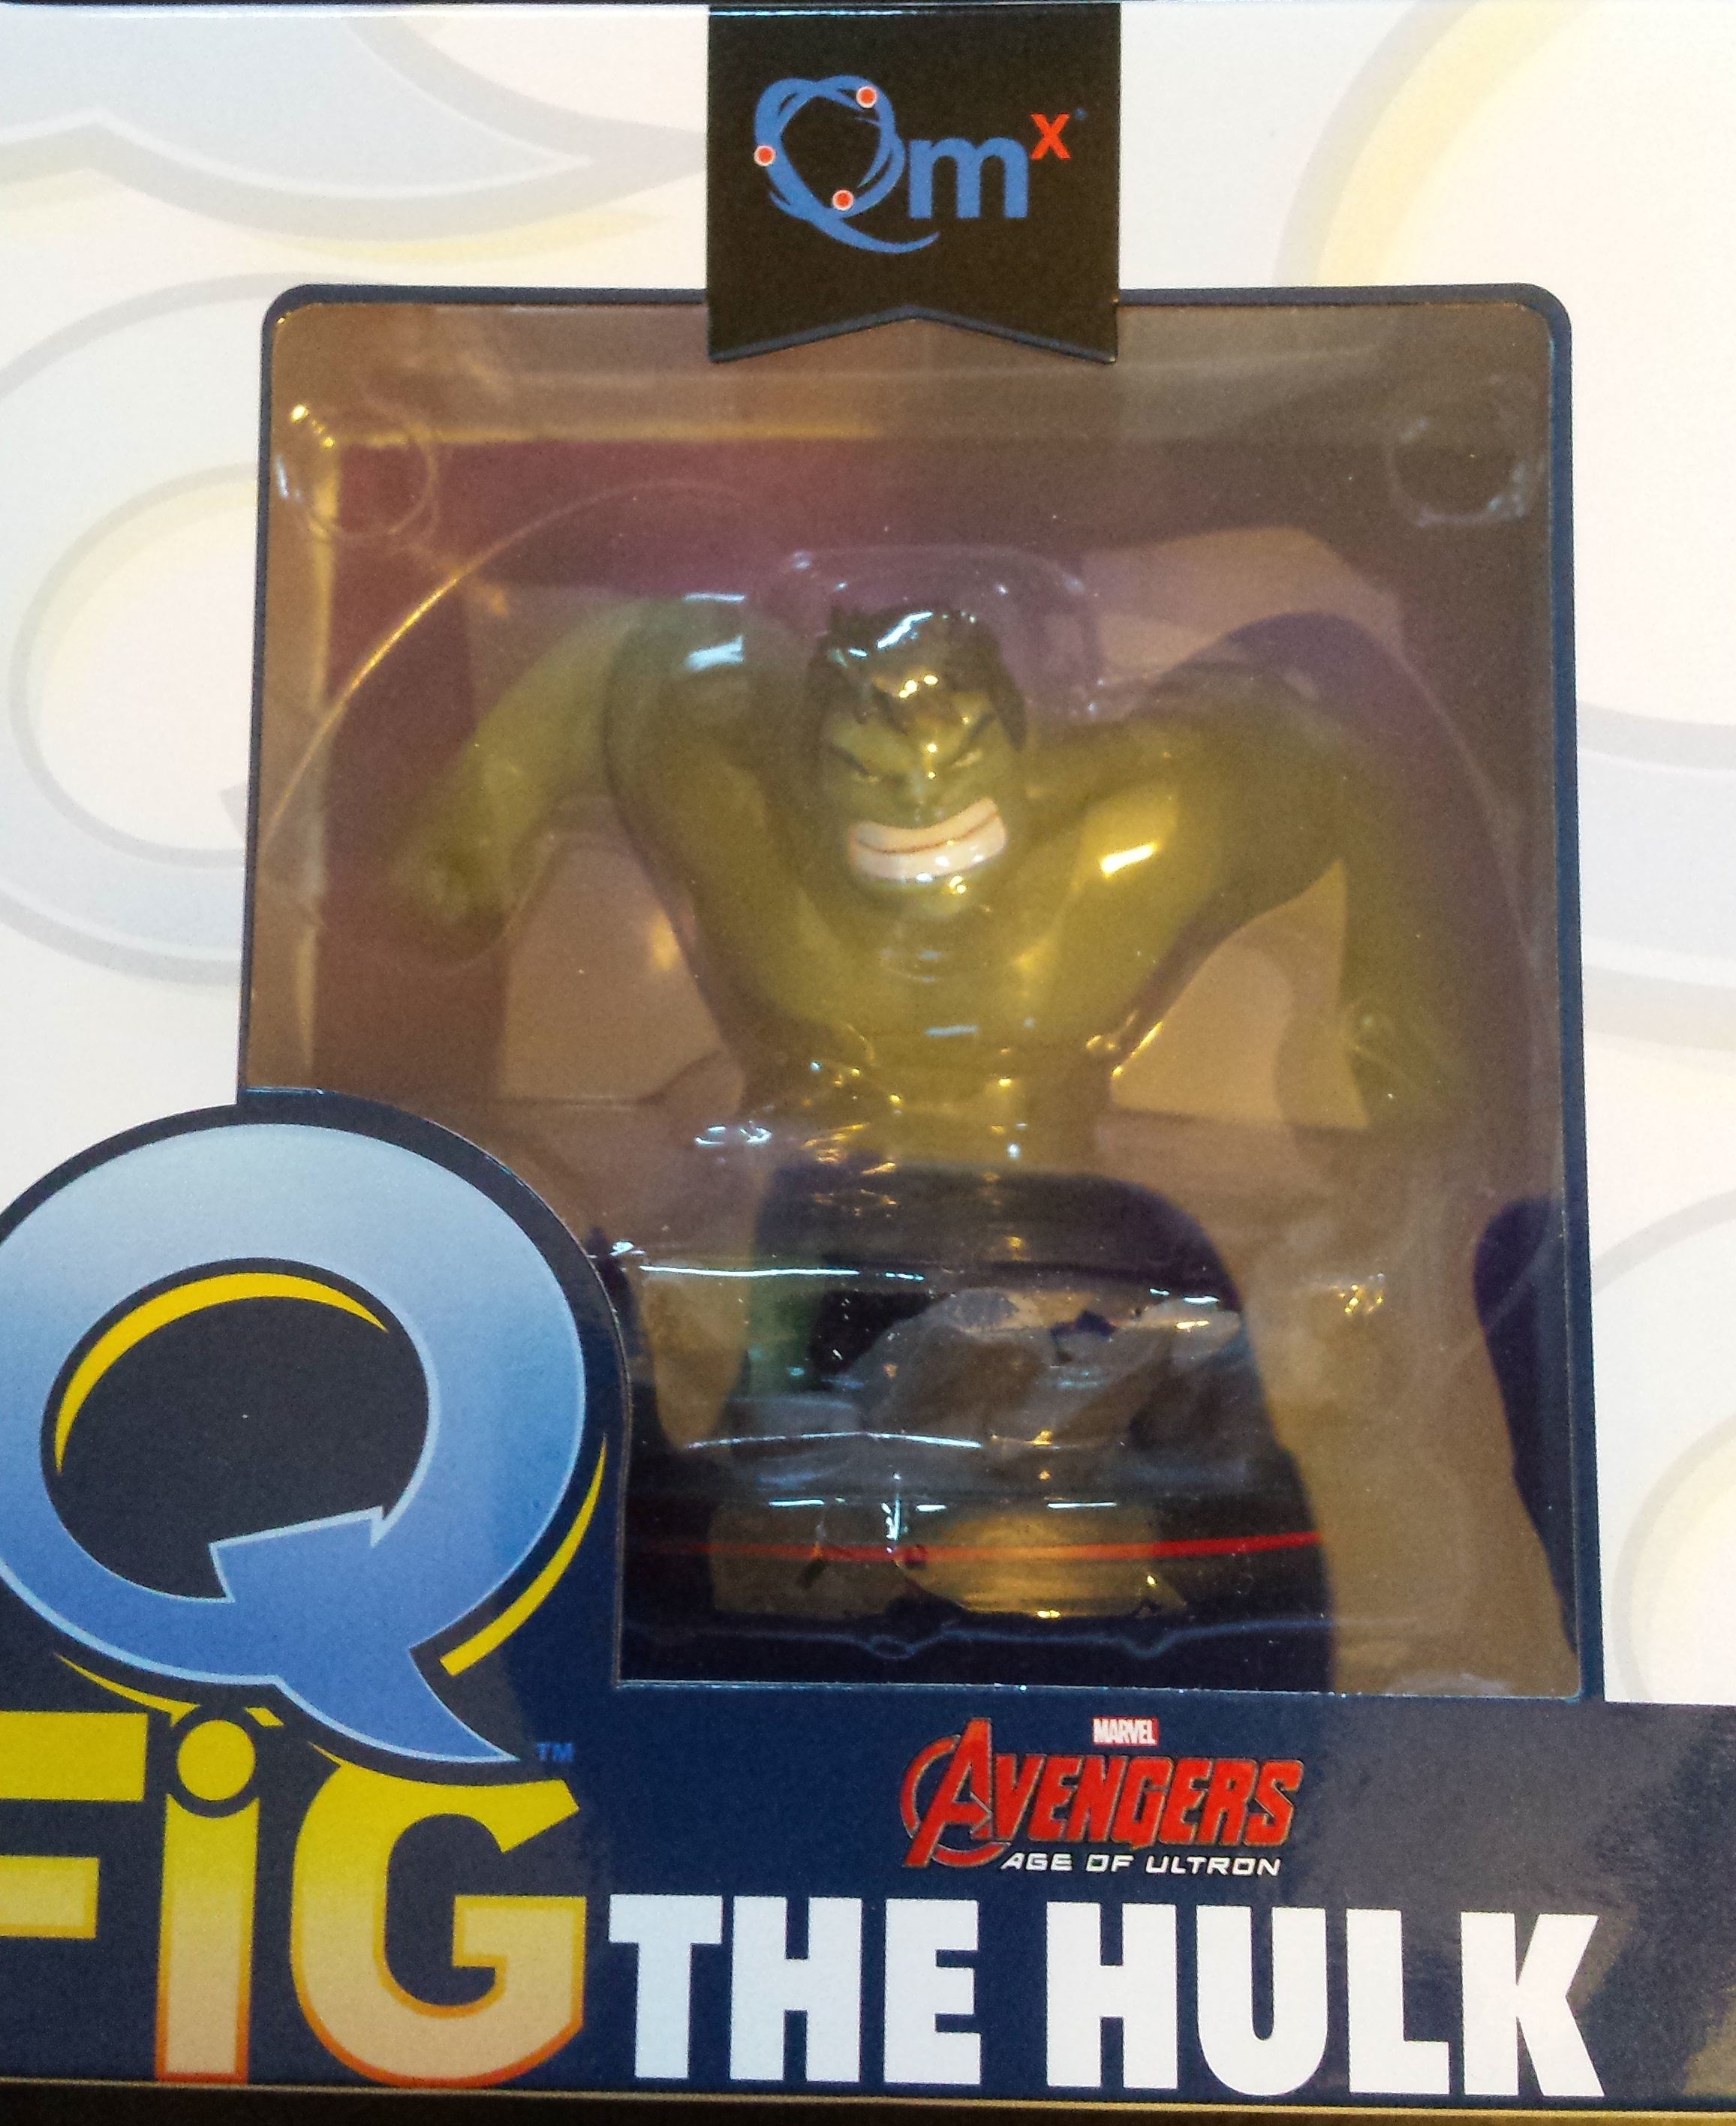 May's loot crate, power, the hulk, avengers: age of ultron